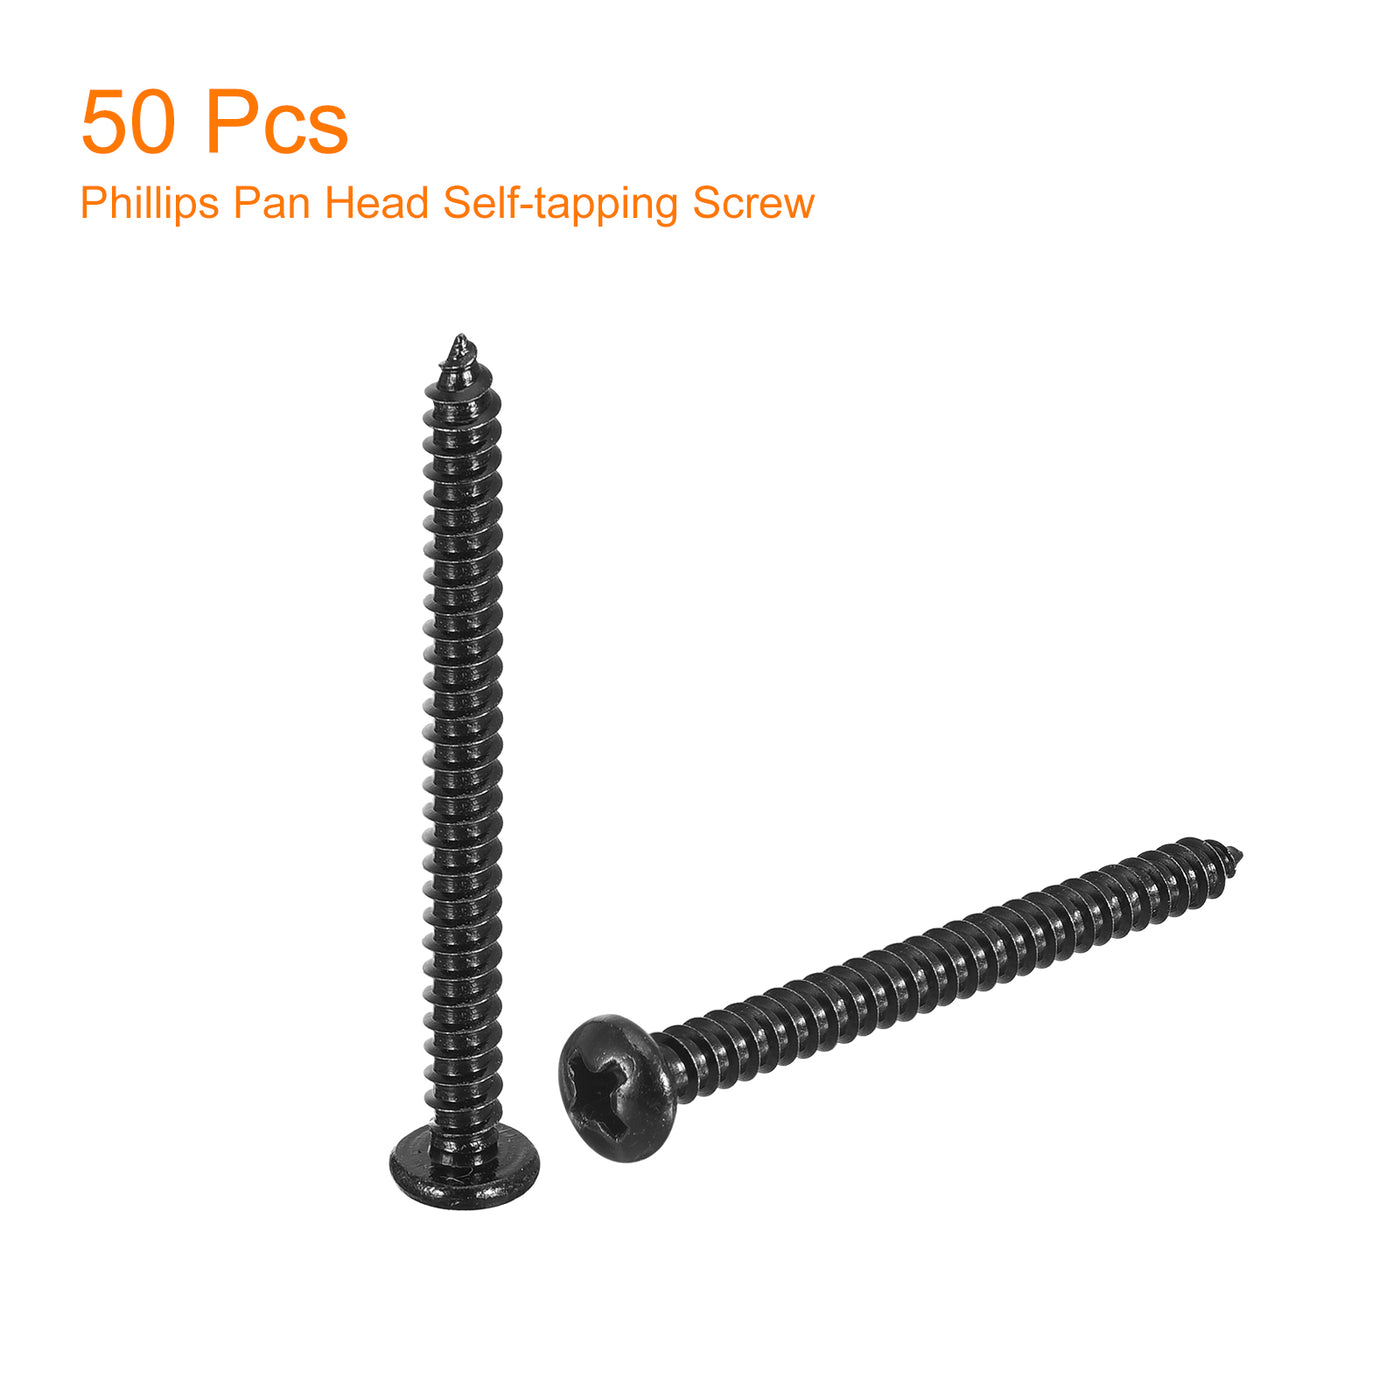 uxcell Uxcell #6 x 1-9/16" Phillips Pan Head Self-tapping Screw, 50pcs - 304 Stainless Steel Round Head Wood Screw Full Thread (Black)